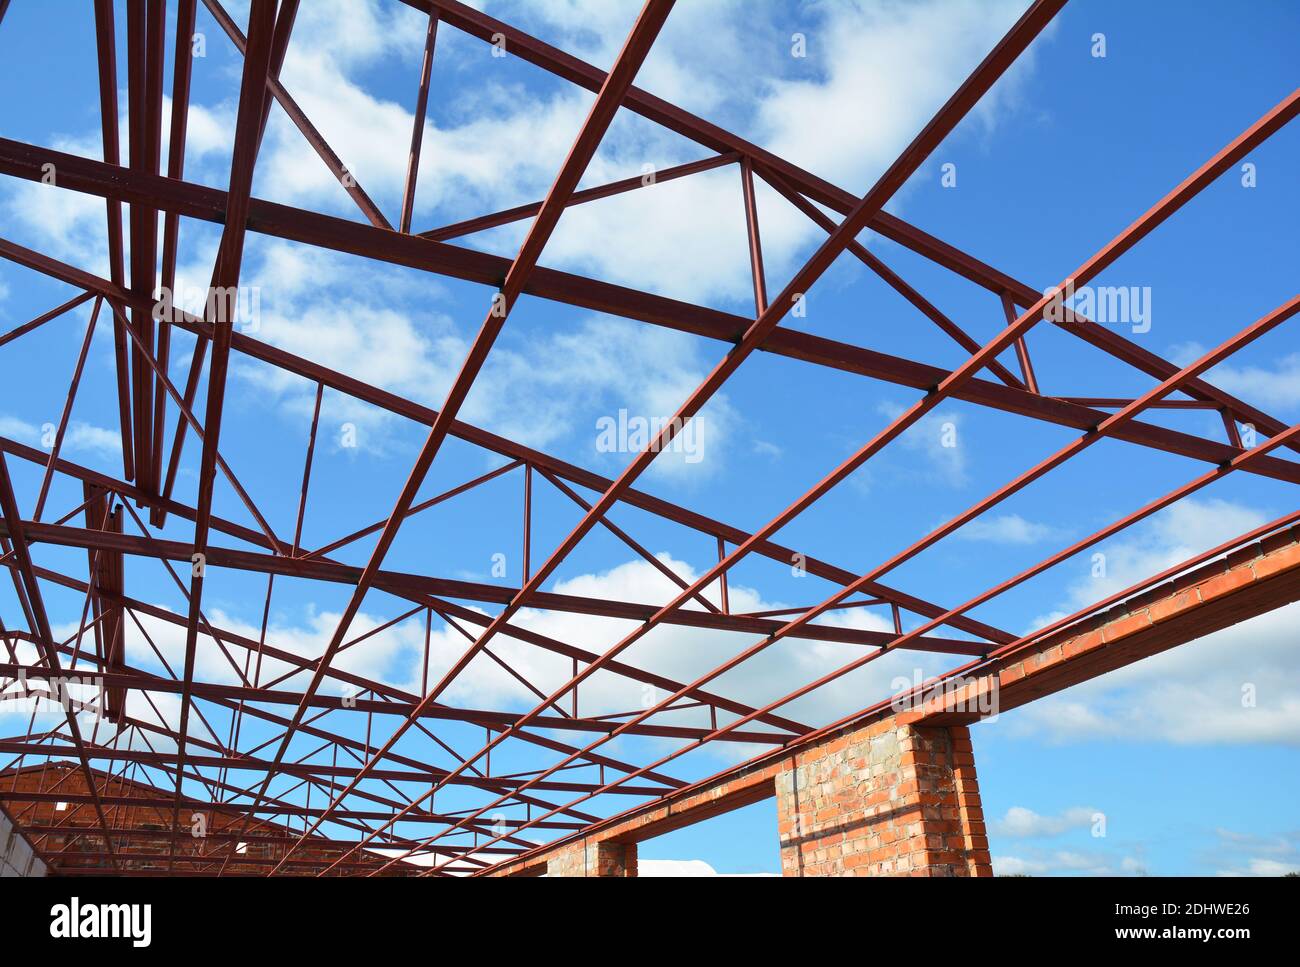 Steel Roof Trusses. Roofing Construction. Metal Roof Frame House Construction with Steel Roof Trusses Details. Stock Photo